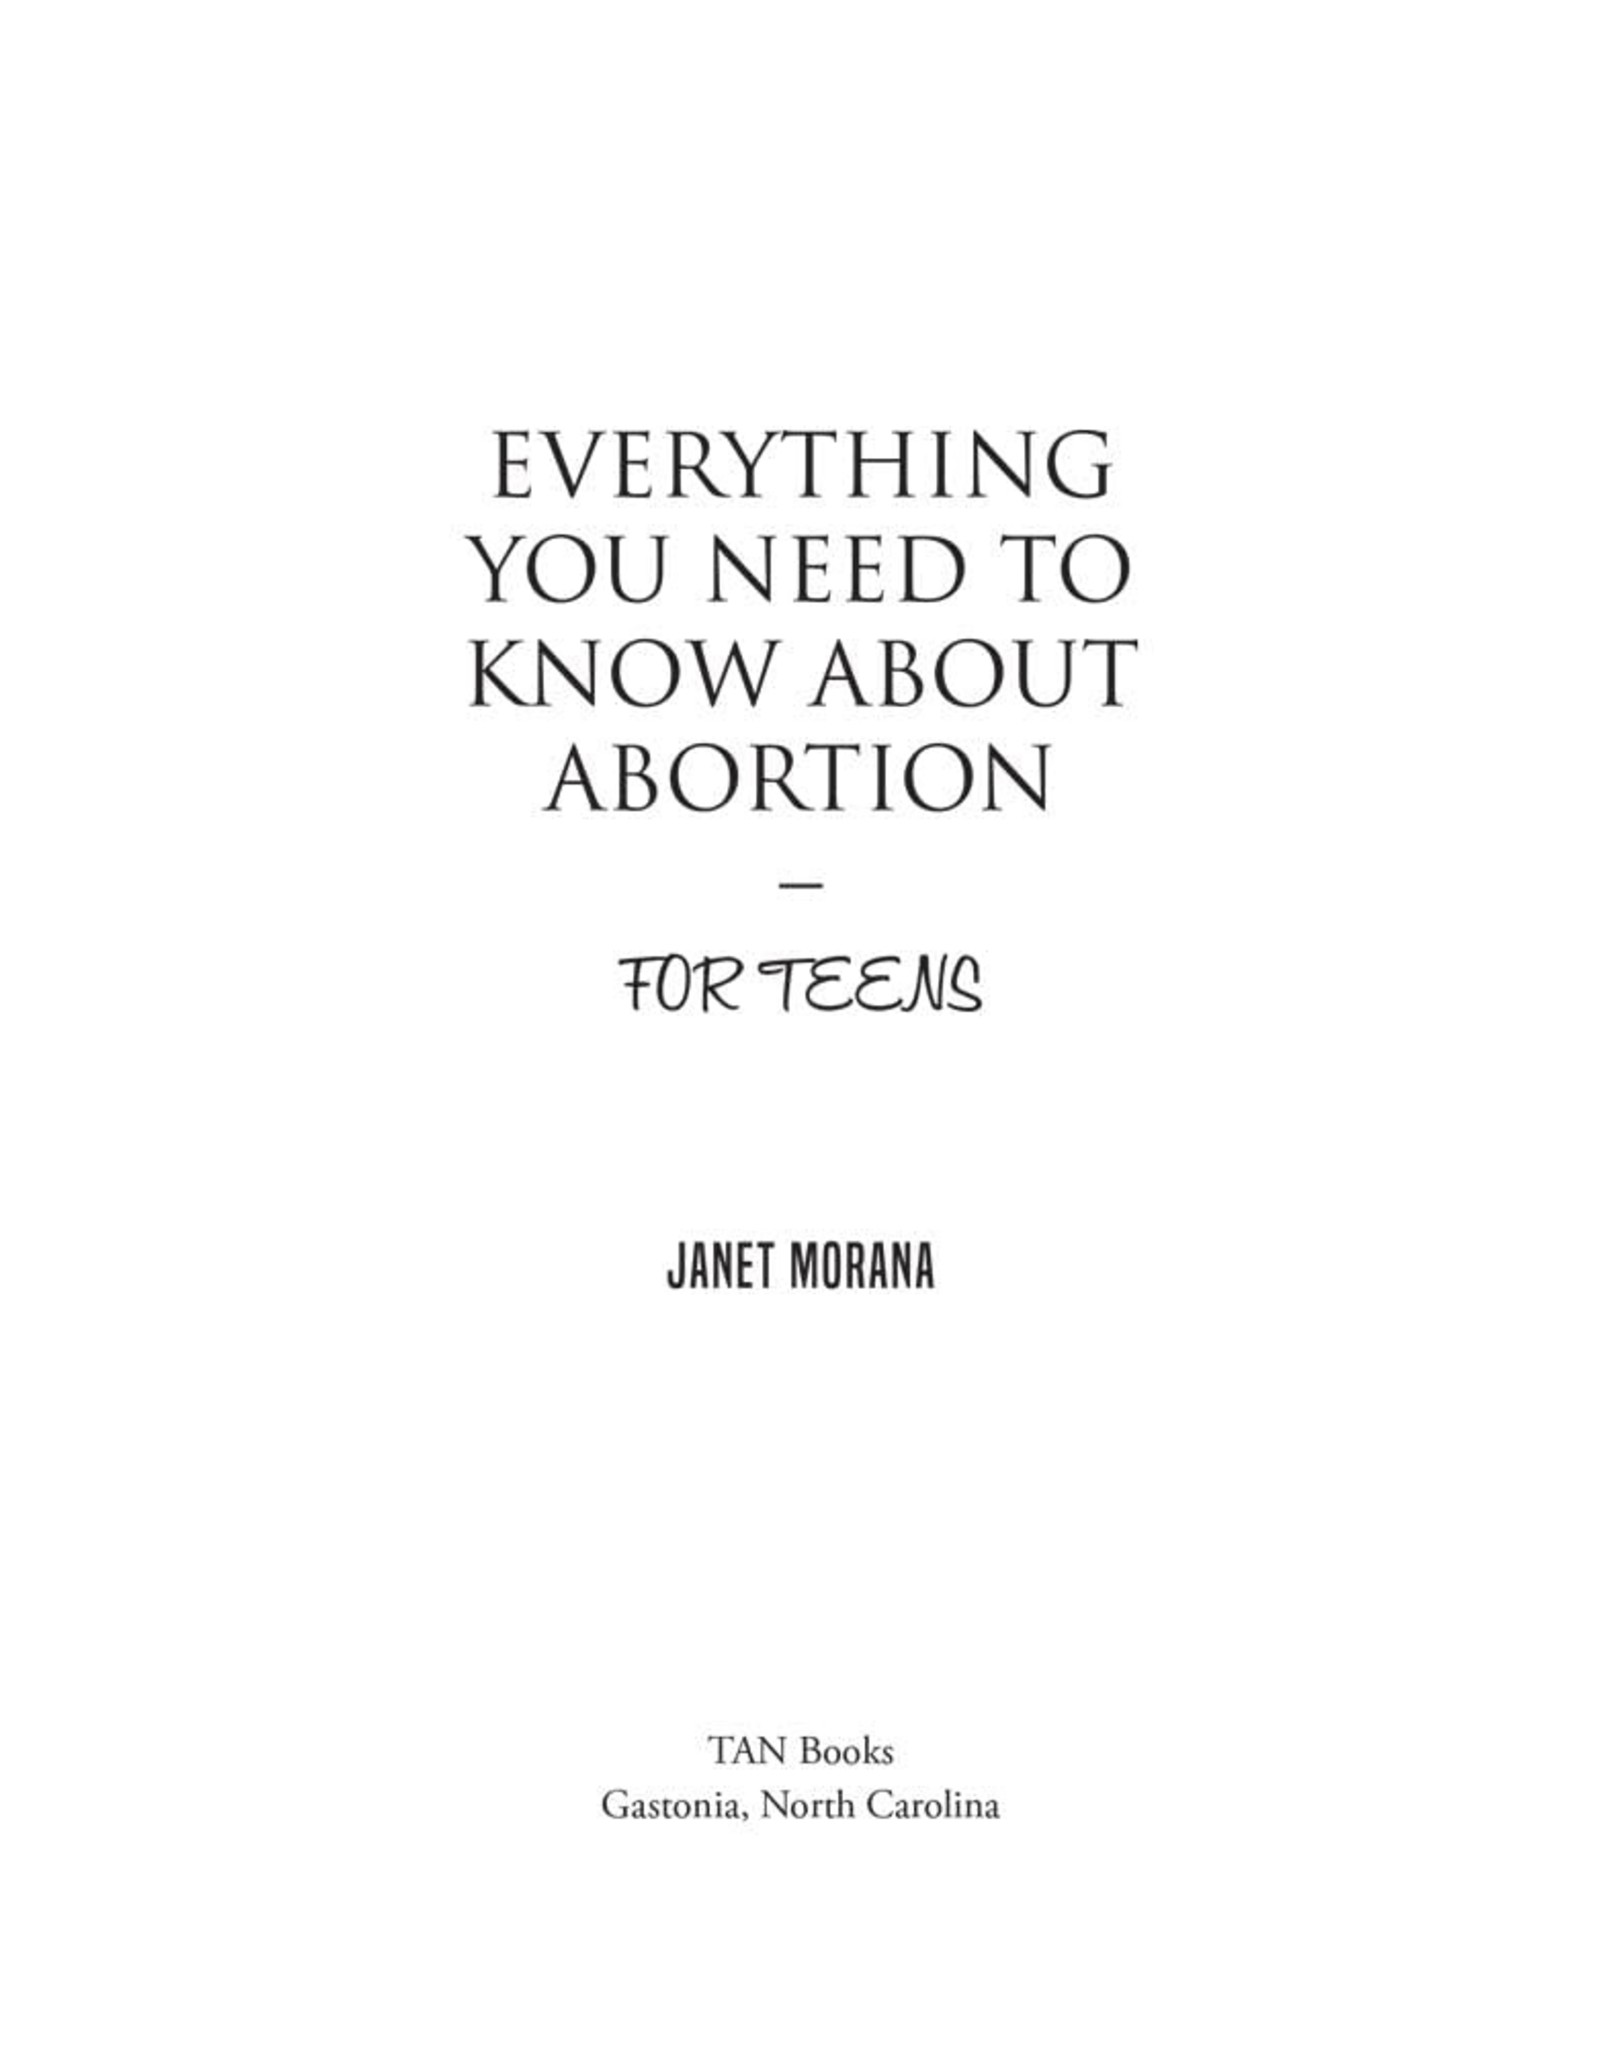 Everything you Need to know about Abortion for Teens